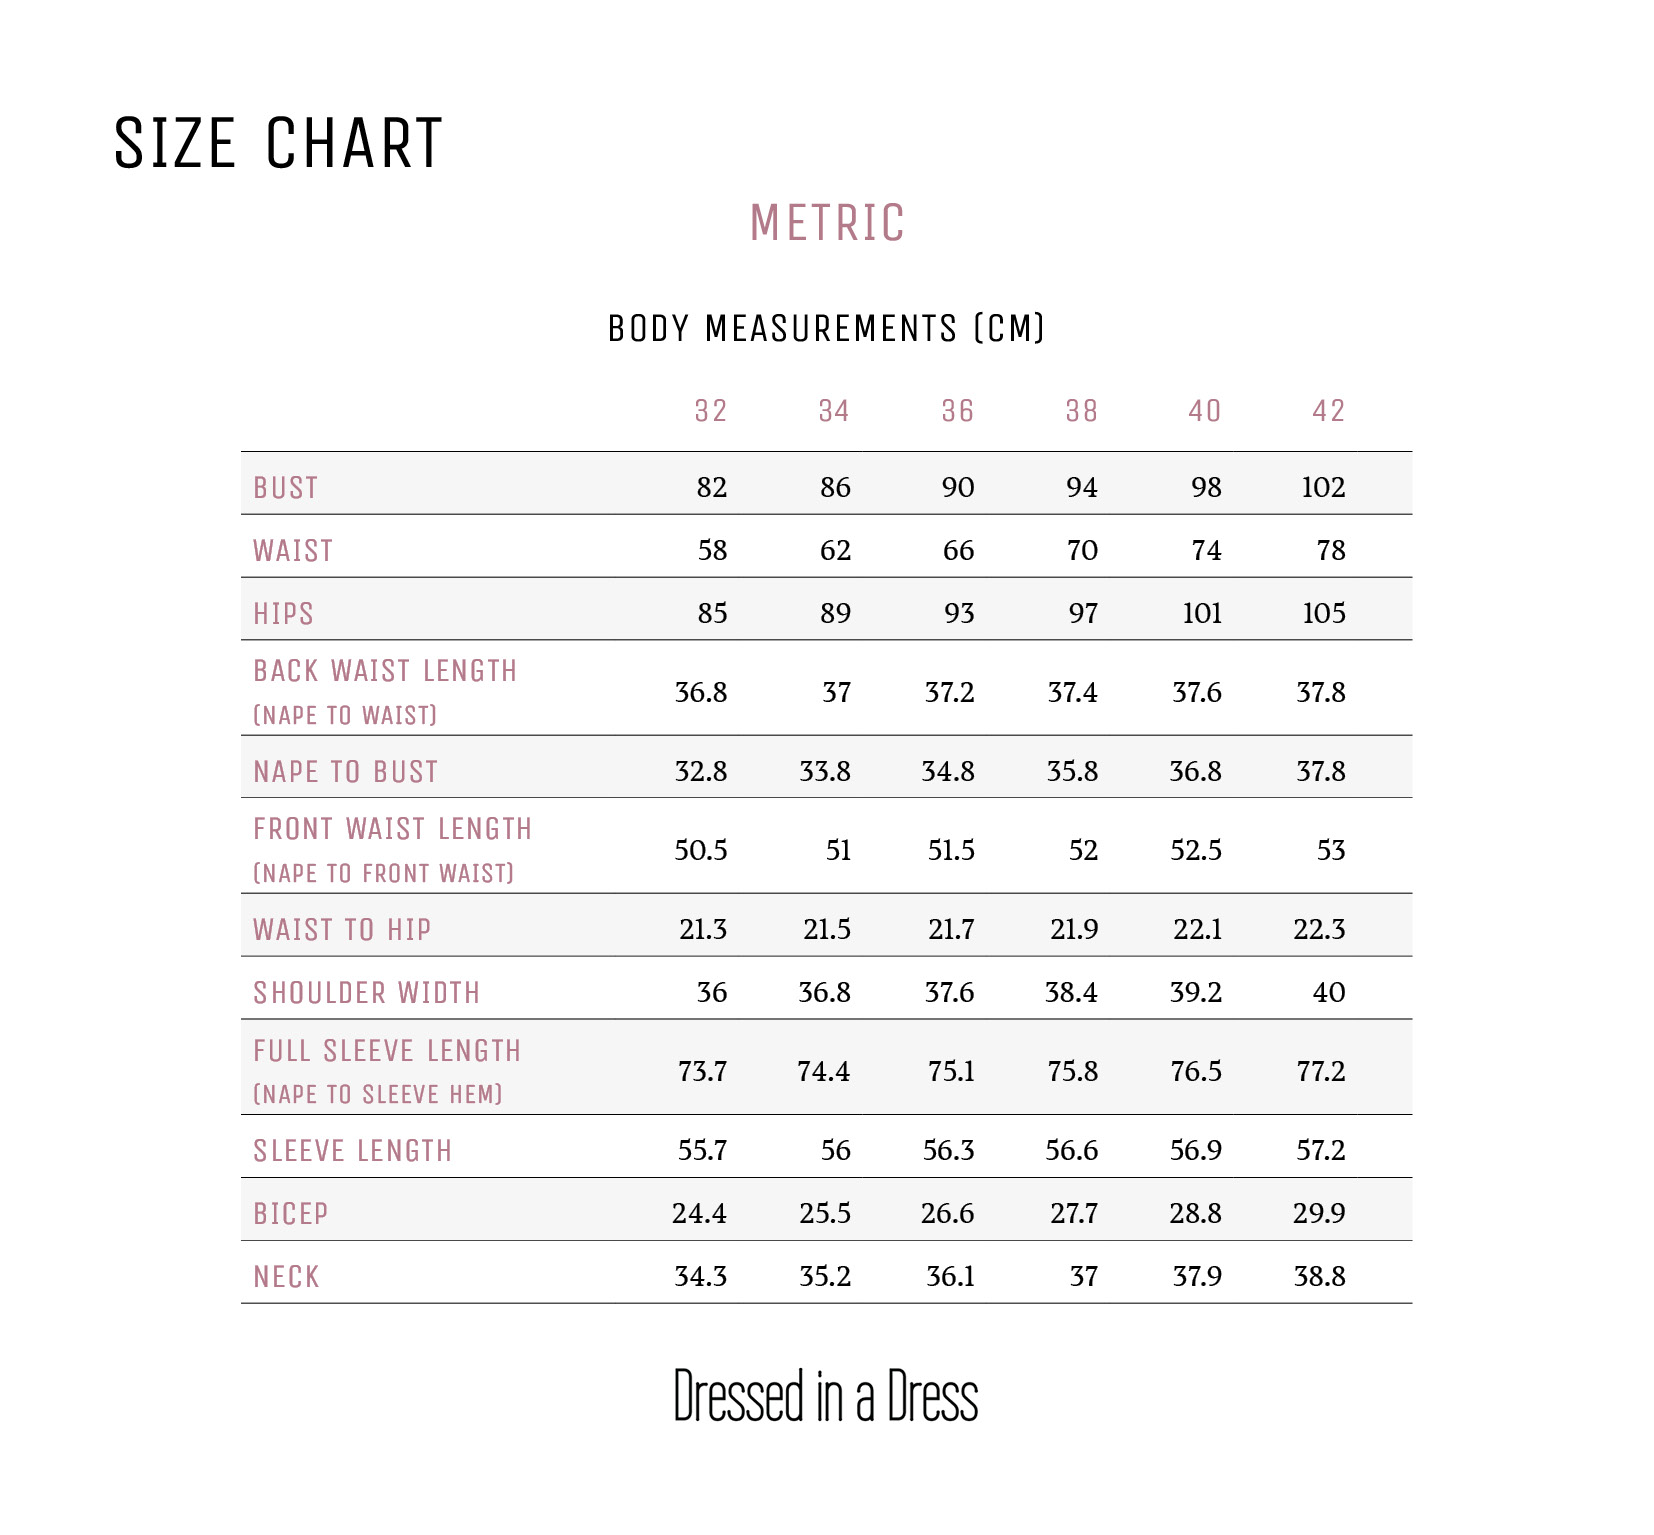 Dressed in a Dress Size Chart—Metric